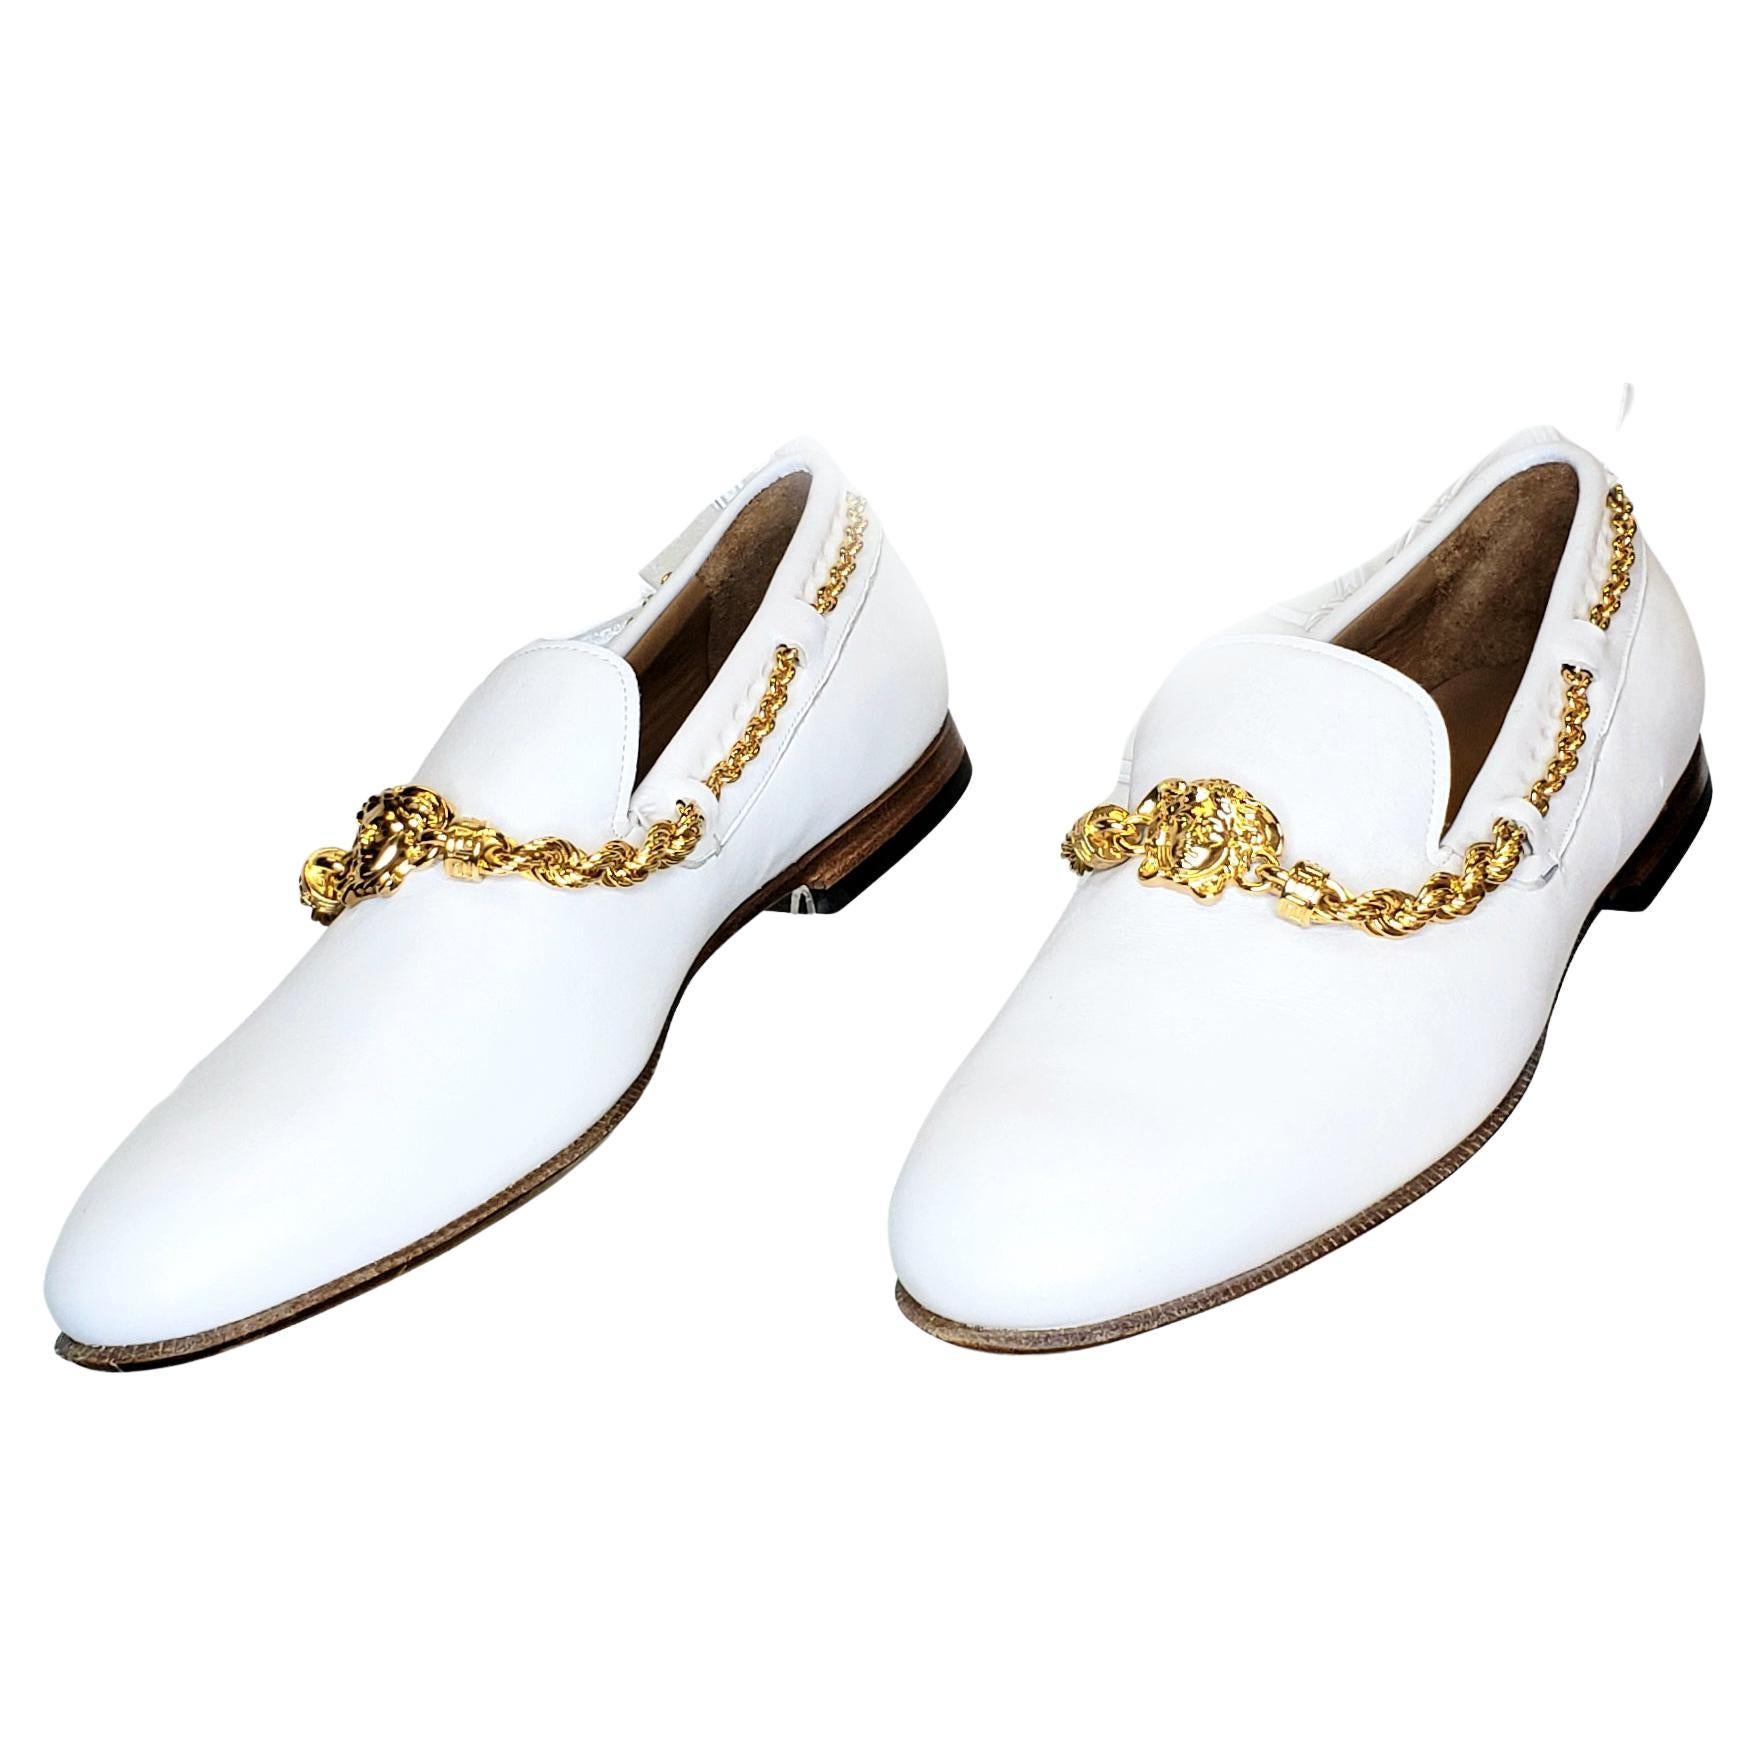 SS 2015 VERSACE WHITE LEATHER LOAFER SHOES w/ GOLD PLATED HARDWARE Size 44 - 11